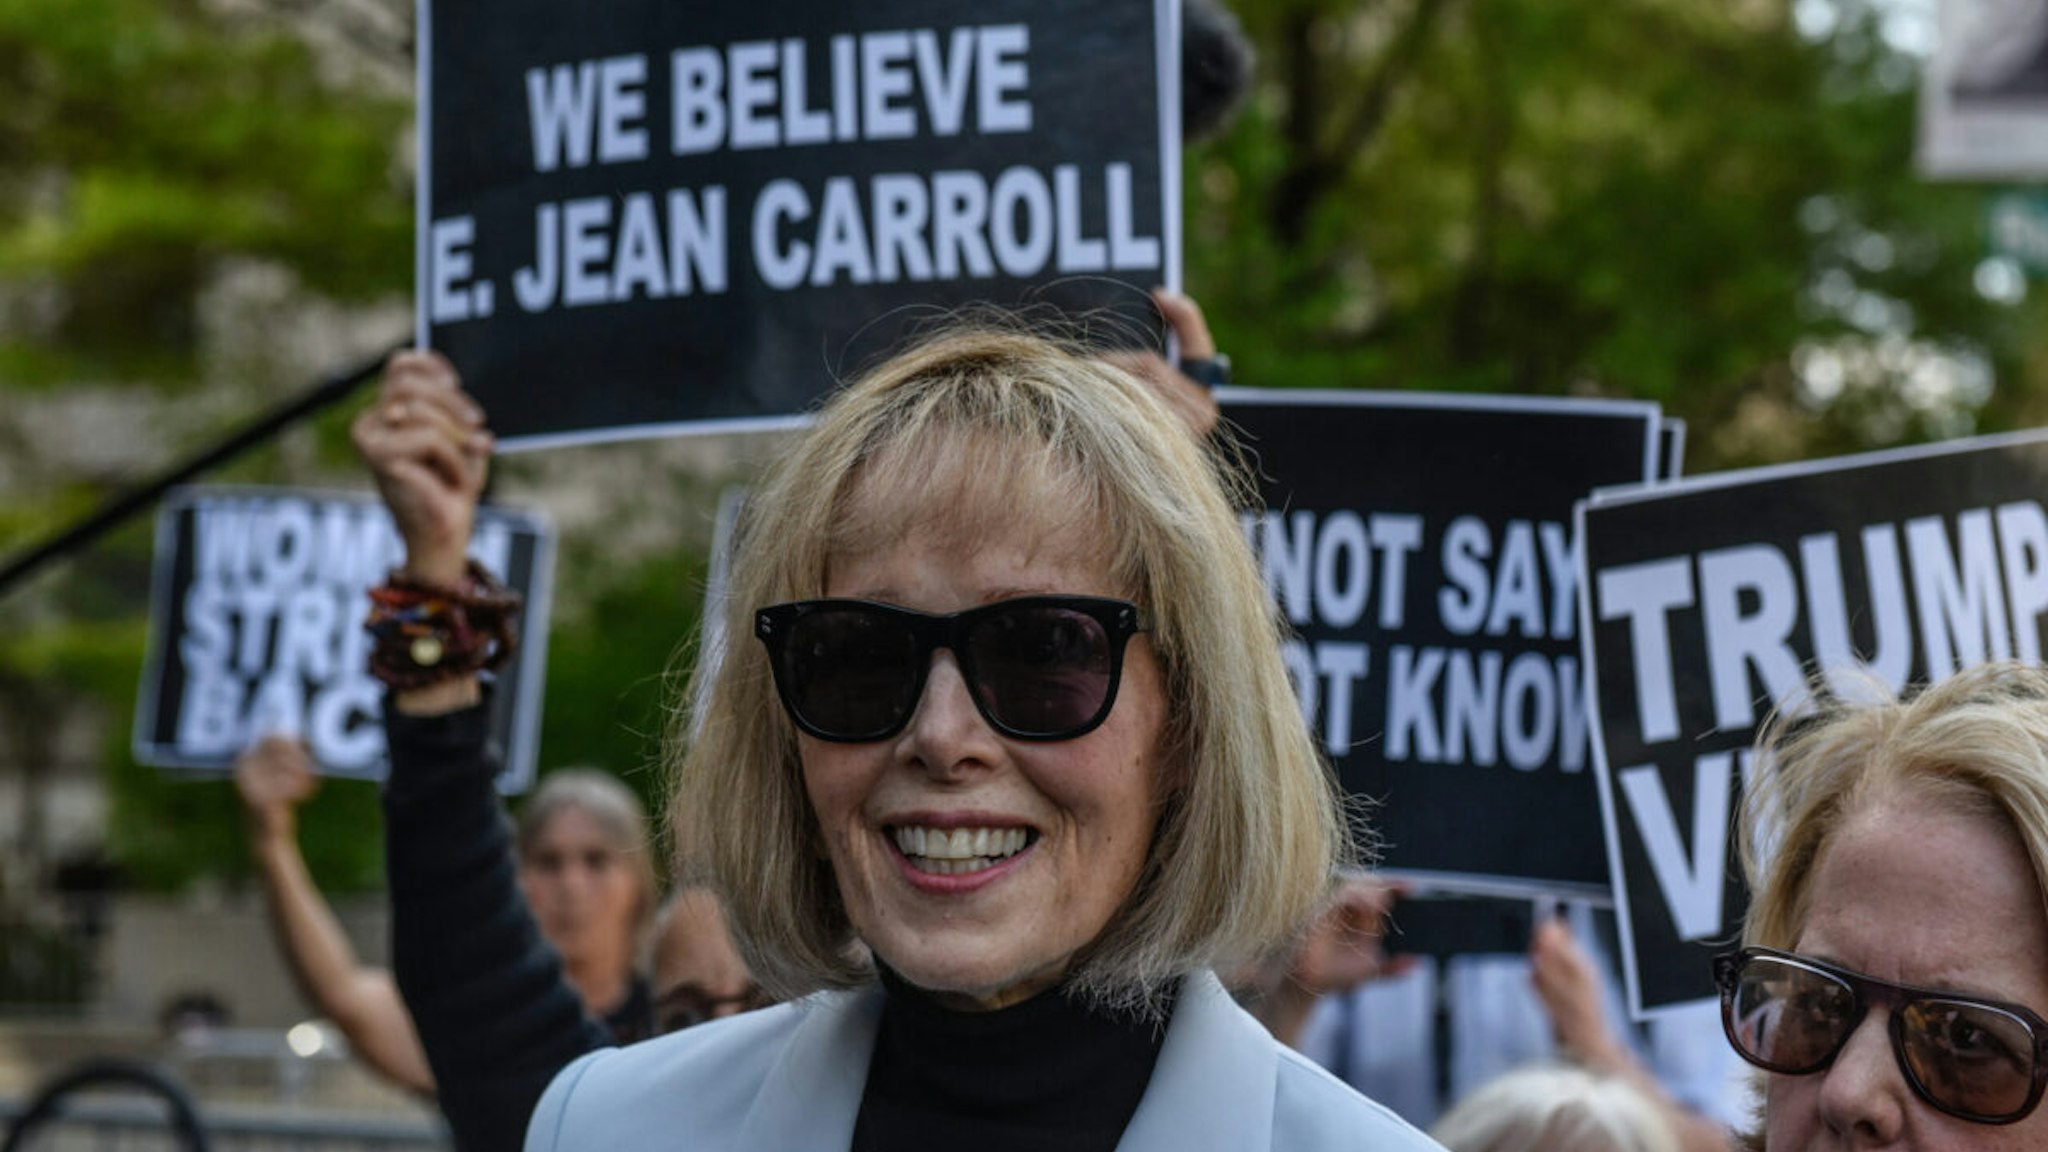 E. Jean Carroll leaves following her trial at Manhattan Federal Court on May 8, 2023 in New York City. Attorneys for E. Jean Carroll and Donald Trump gave closing arguments in the battery and defamation trial against the former president.